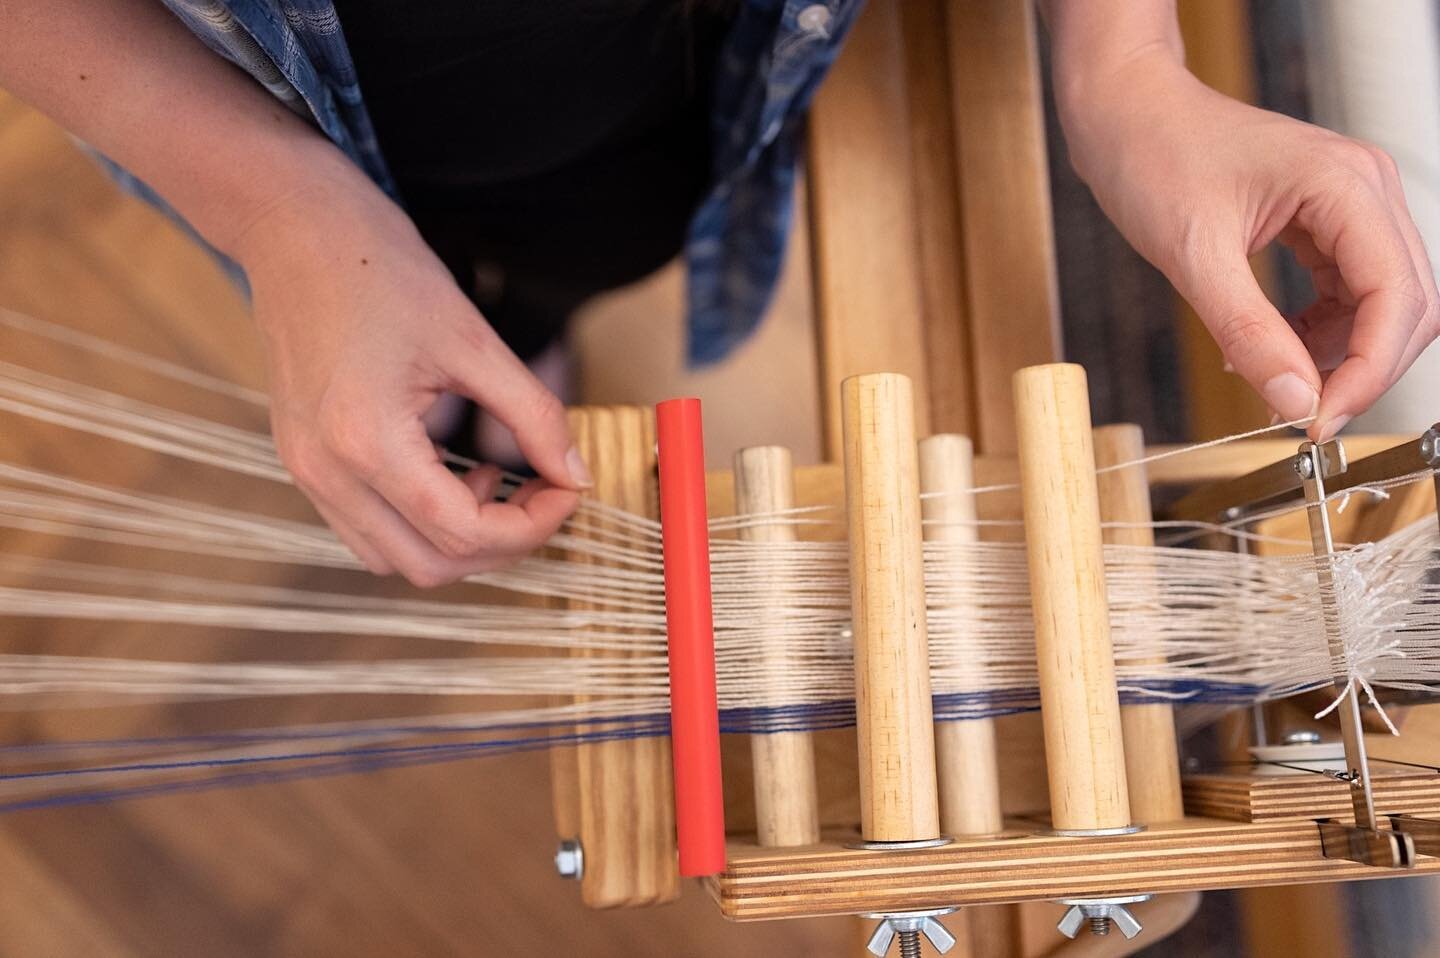 Thread by thread &bull; The last step between the spools and the beam is the tensionbox. With this little handy tool all the threads stay nicely sorted and under proper tension. Like that everything goes onto the loom neatly to start weaving. Using a